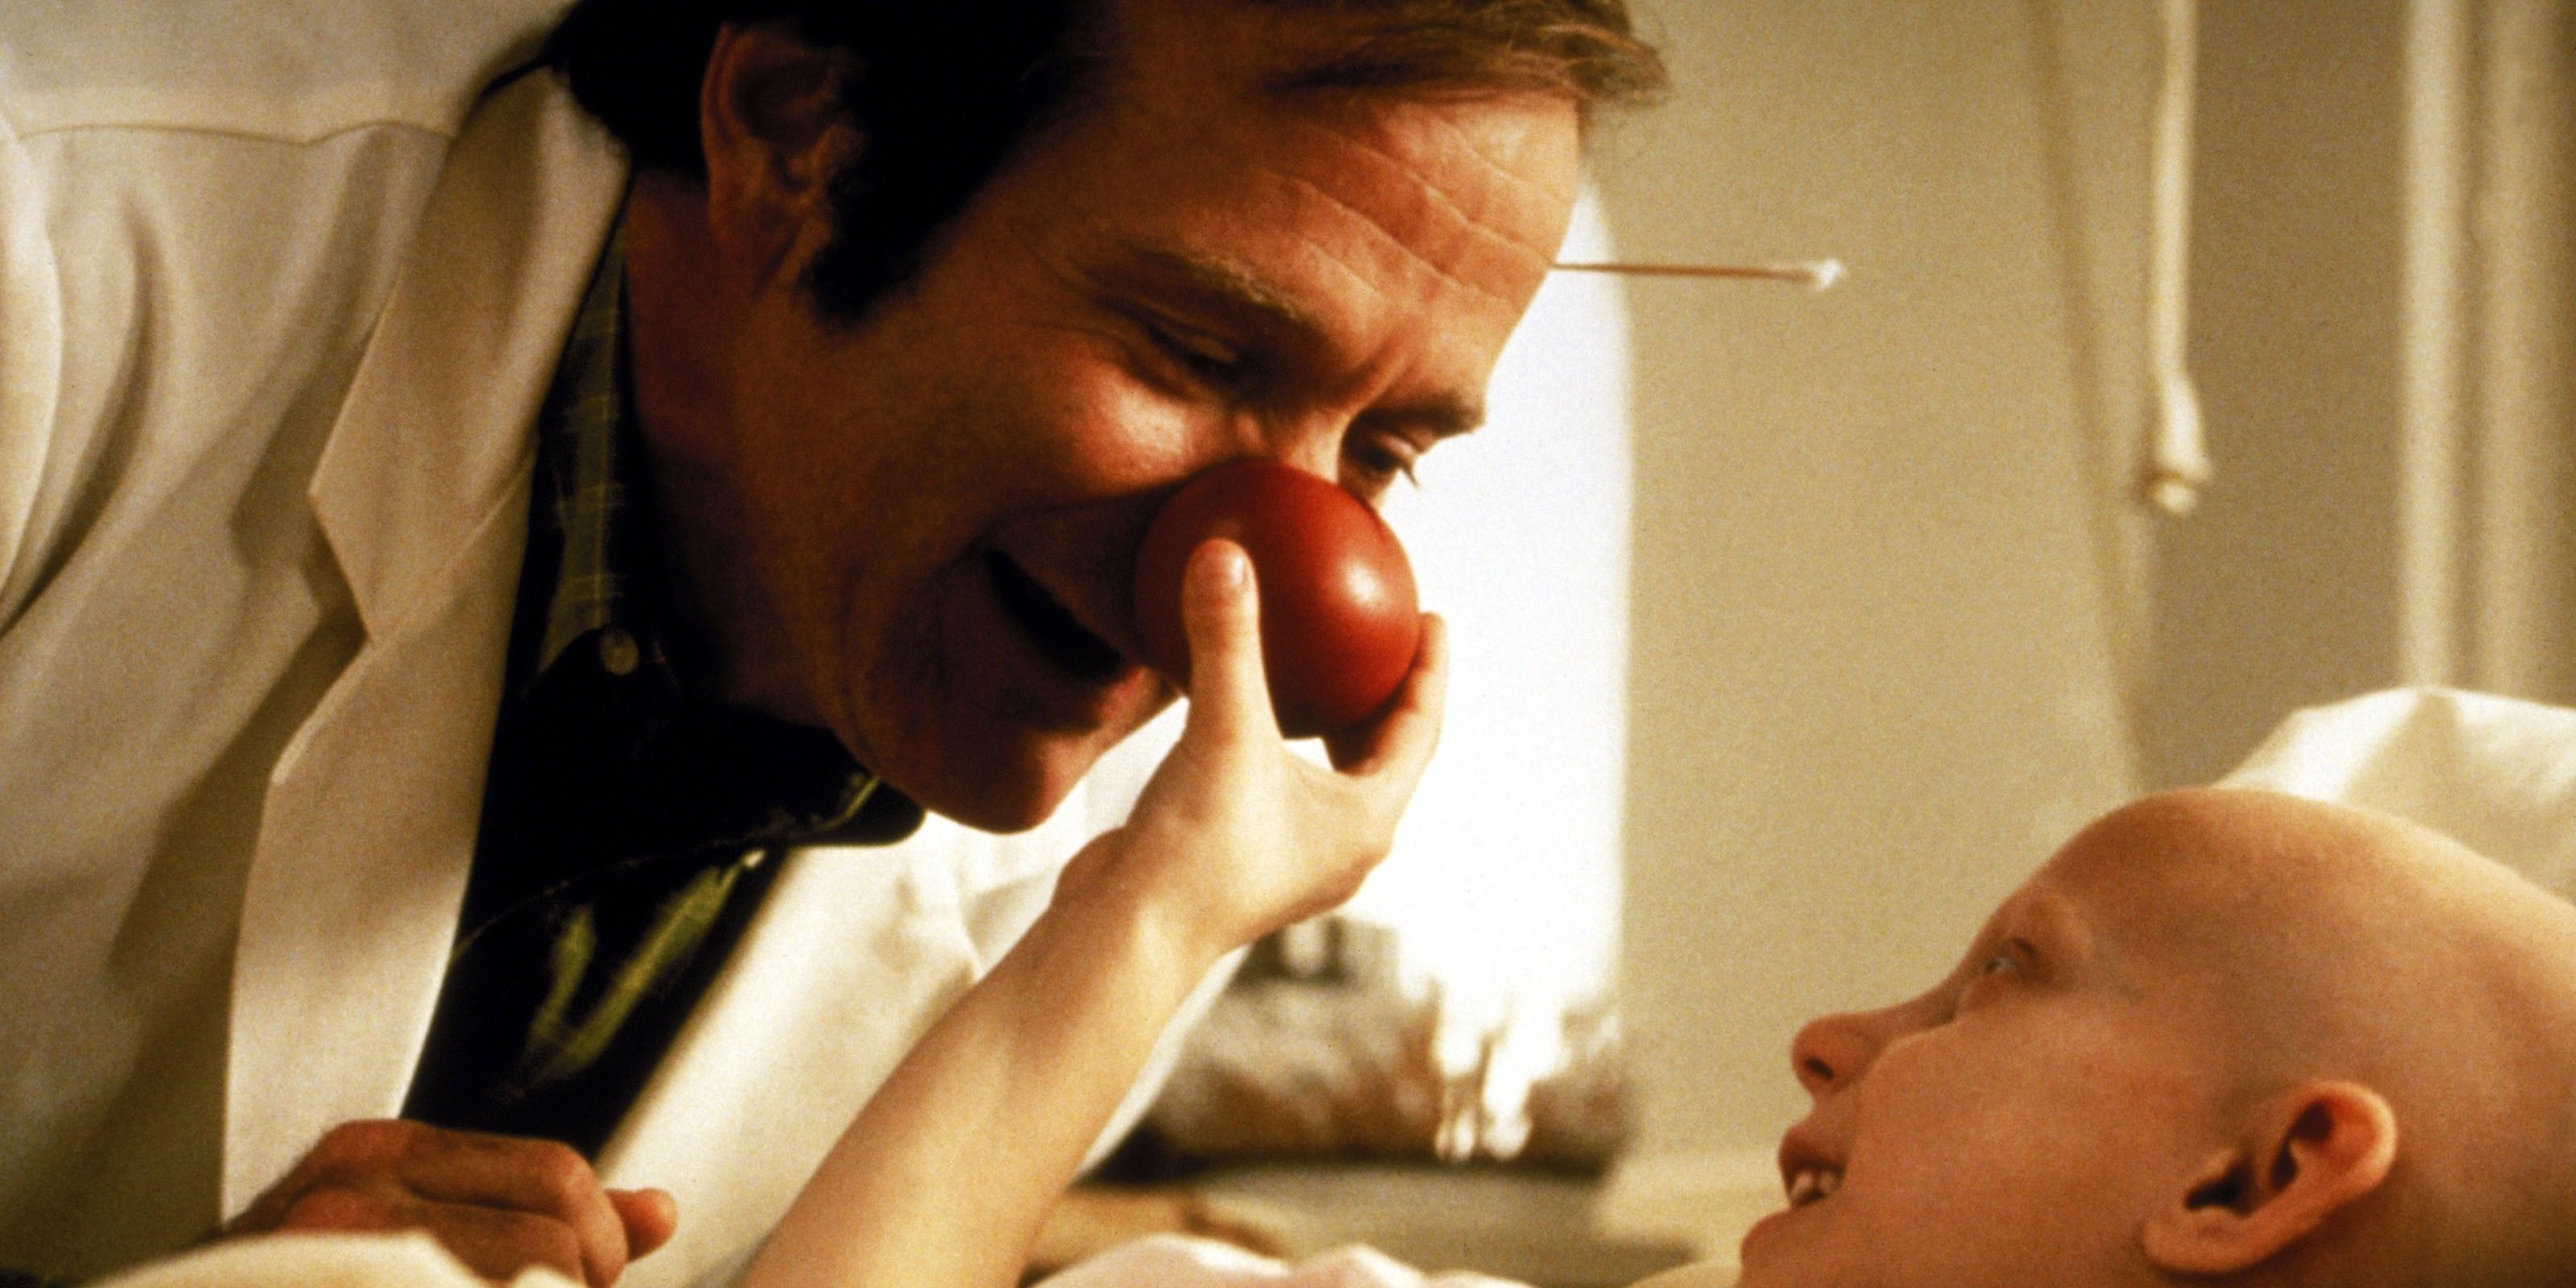 In Patch Adams, a boy presses the doctor's clown nose